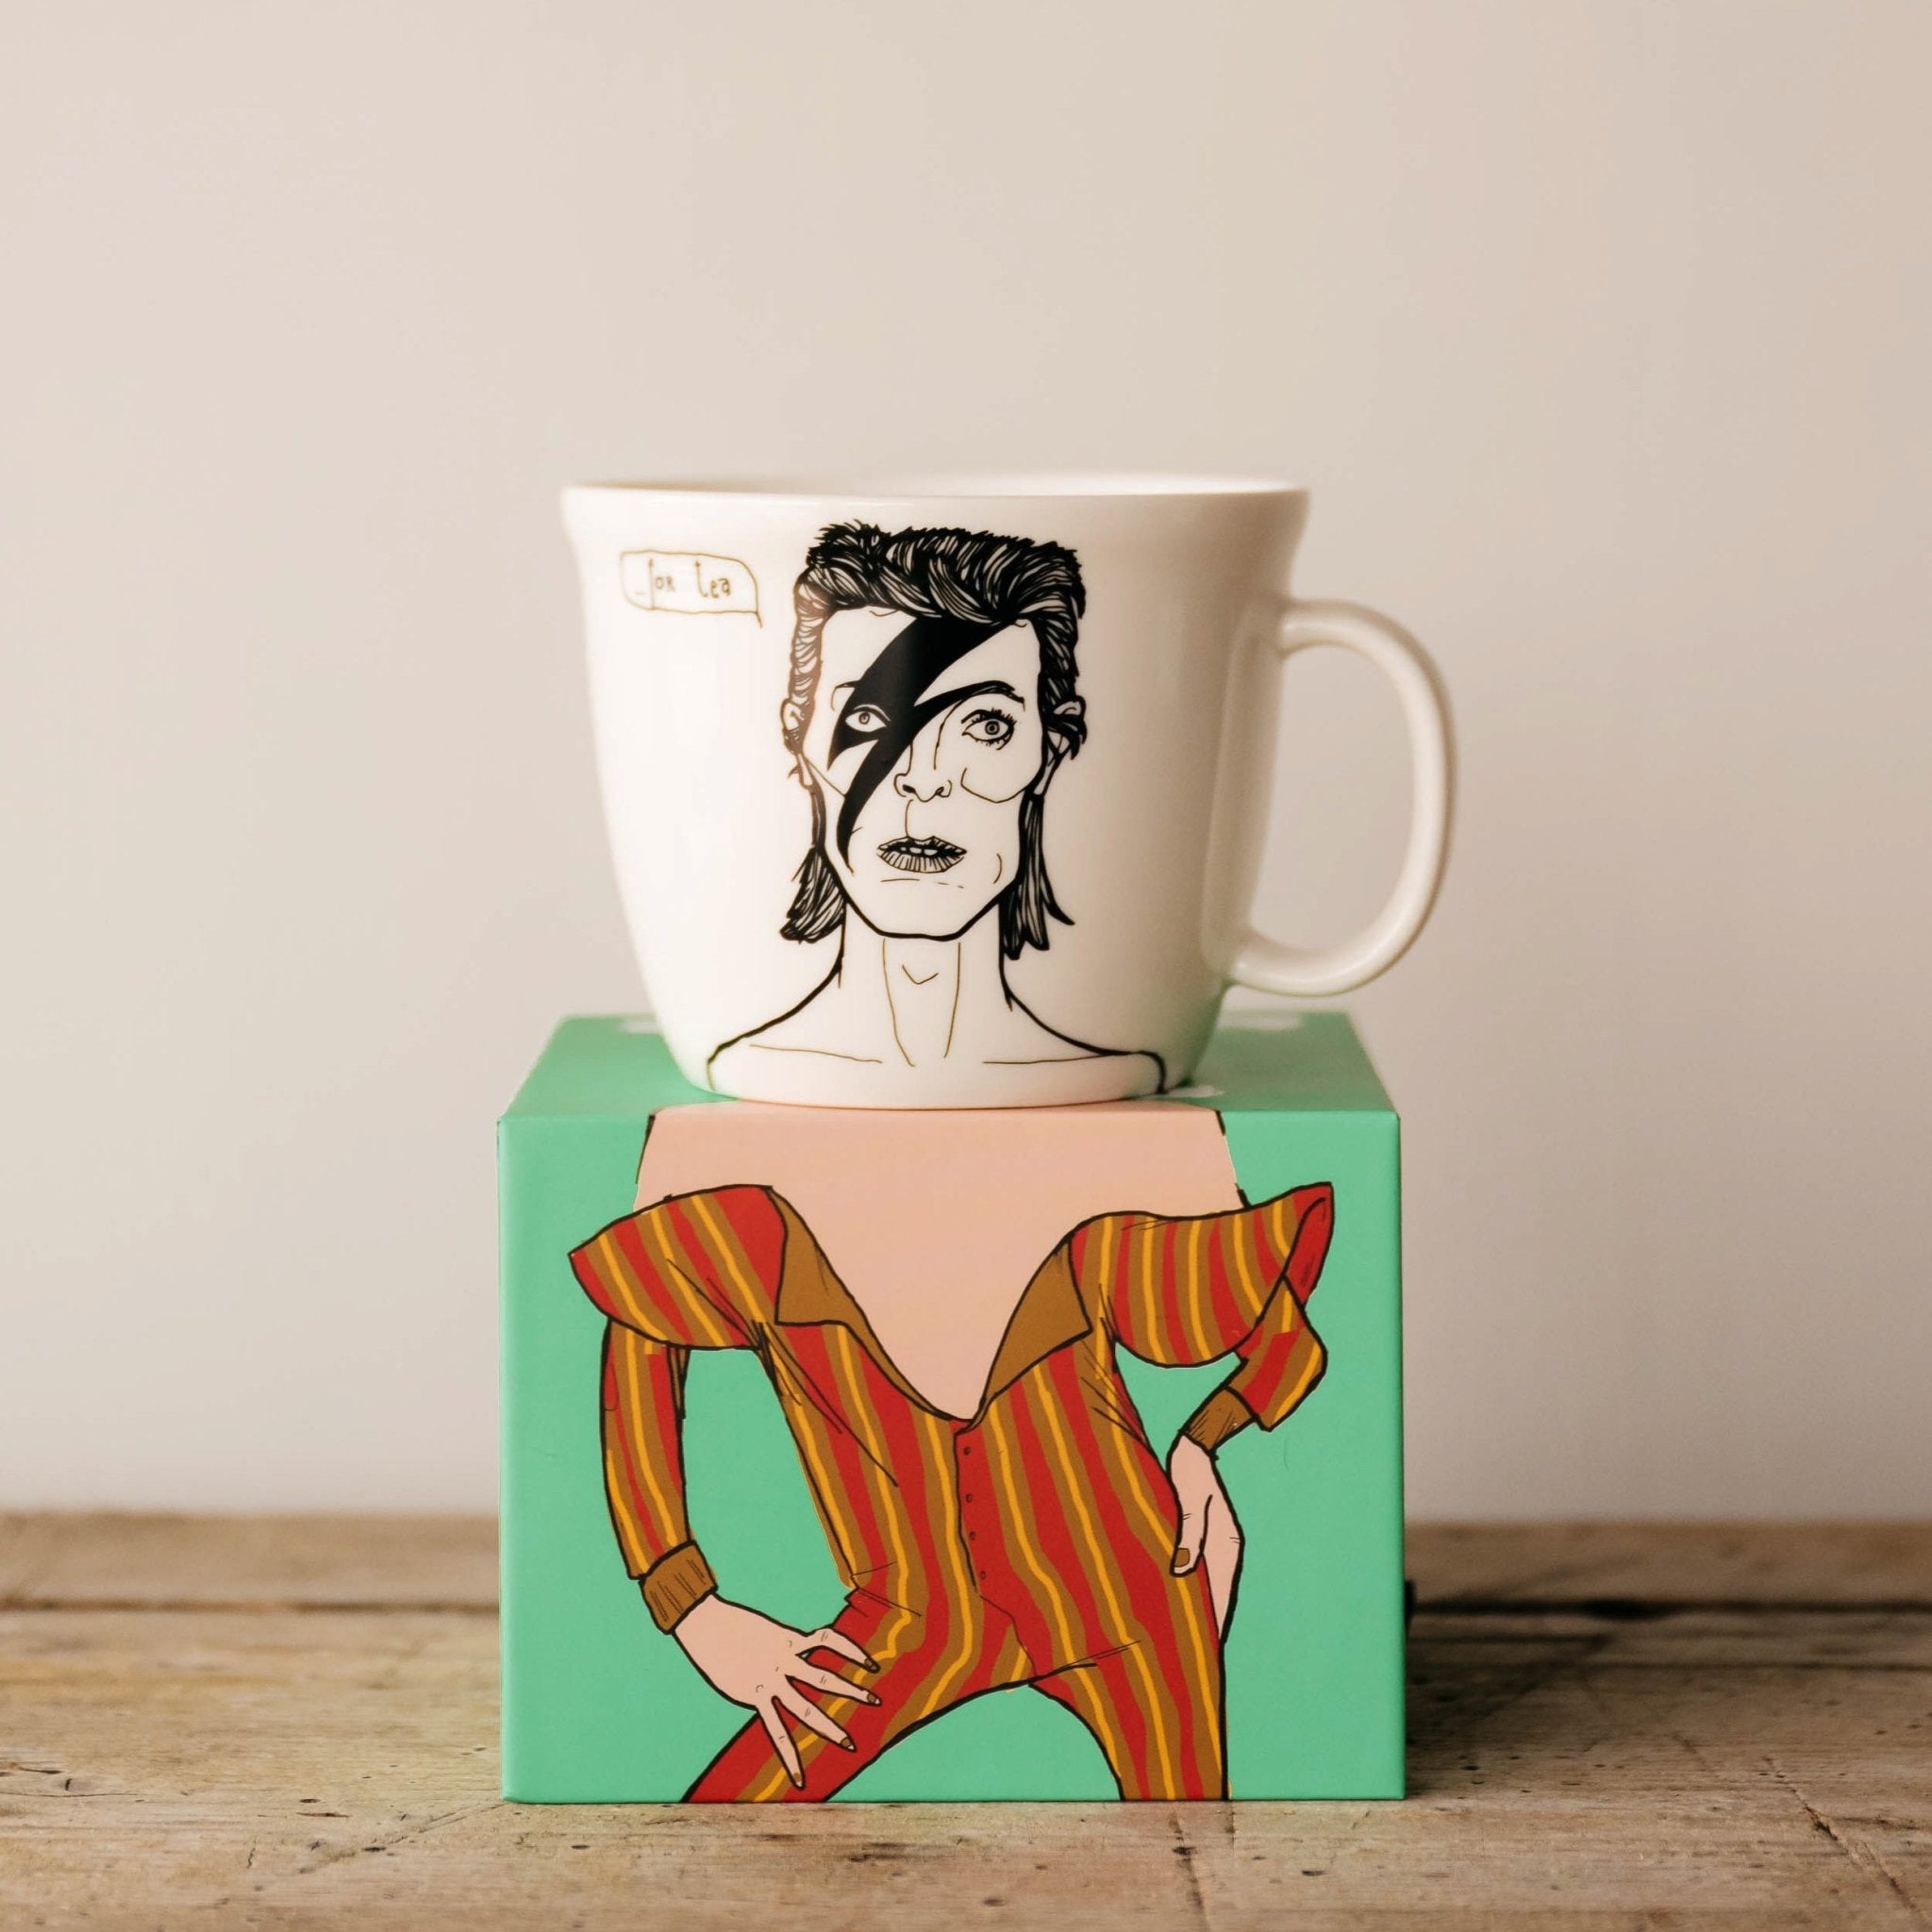 Porcelain cup inspired by David Bowie on the box